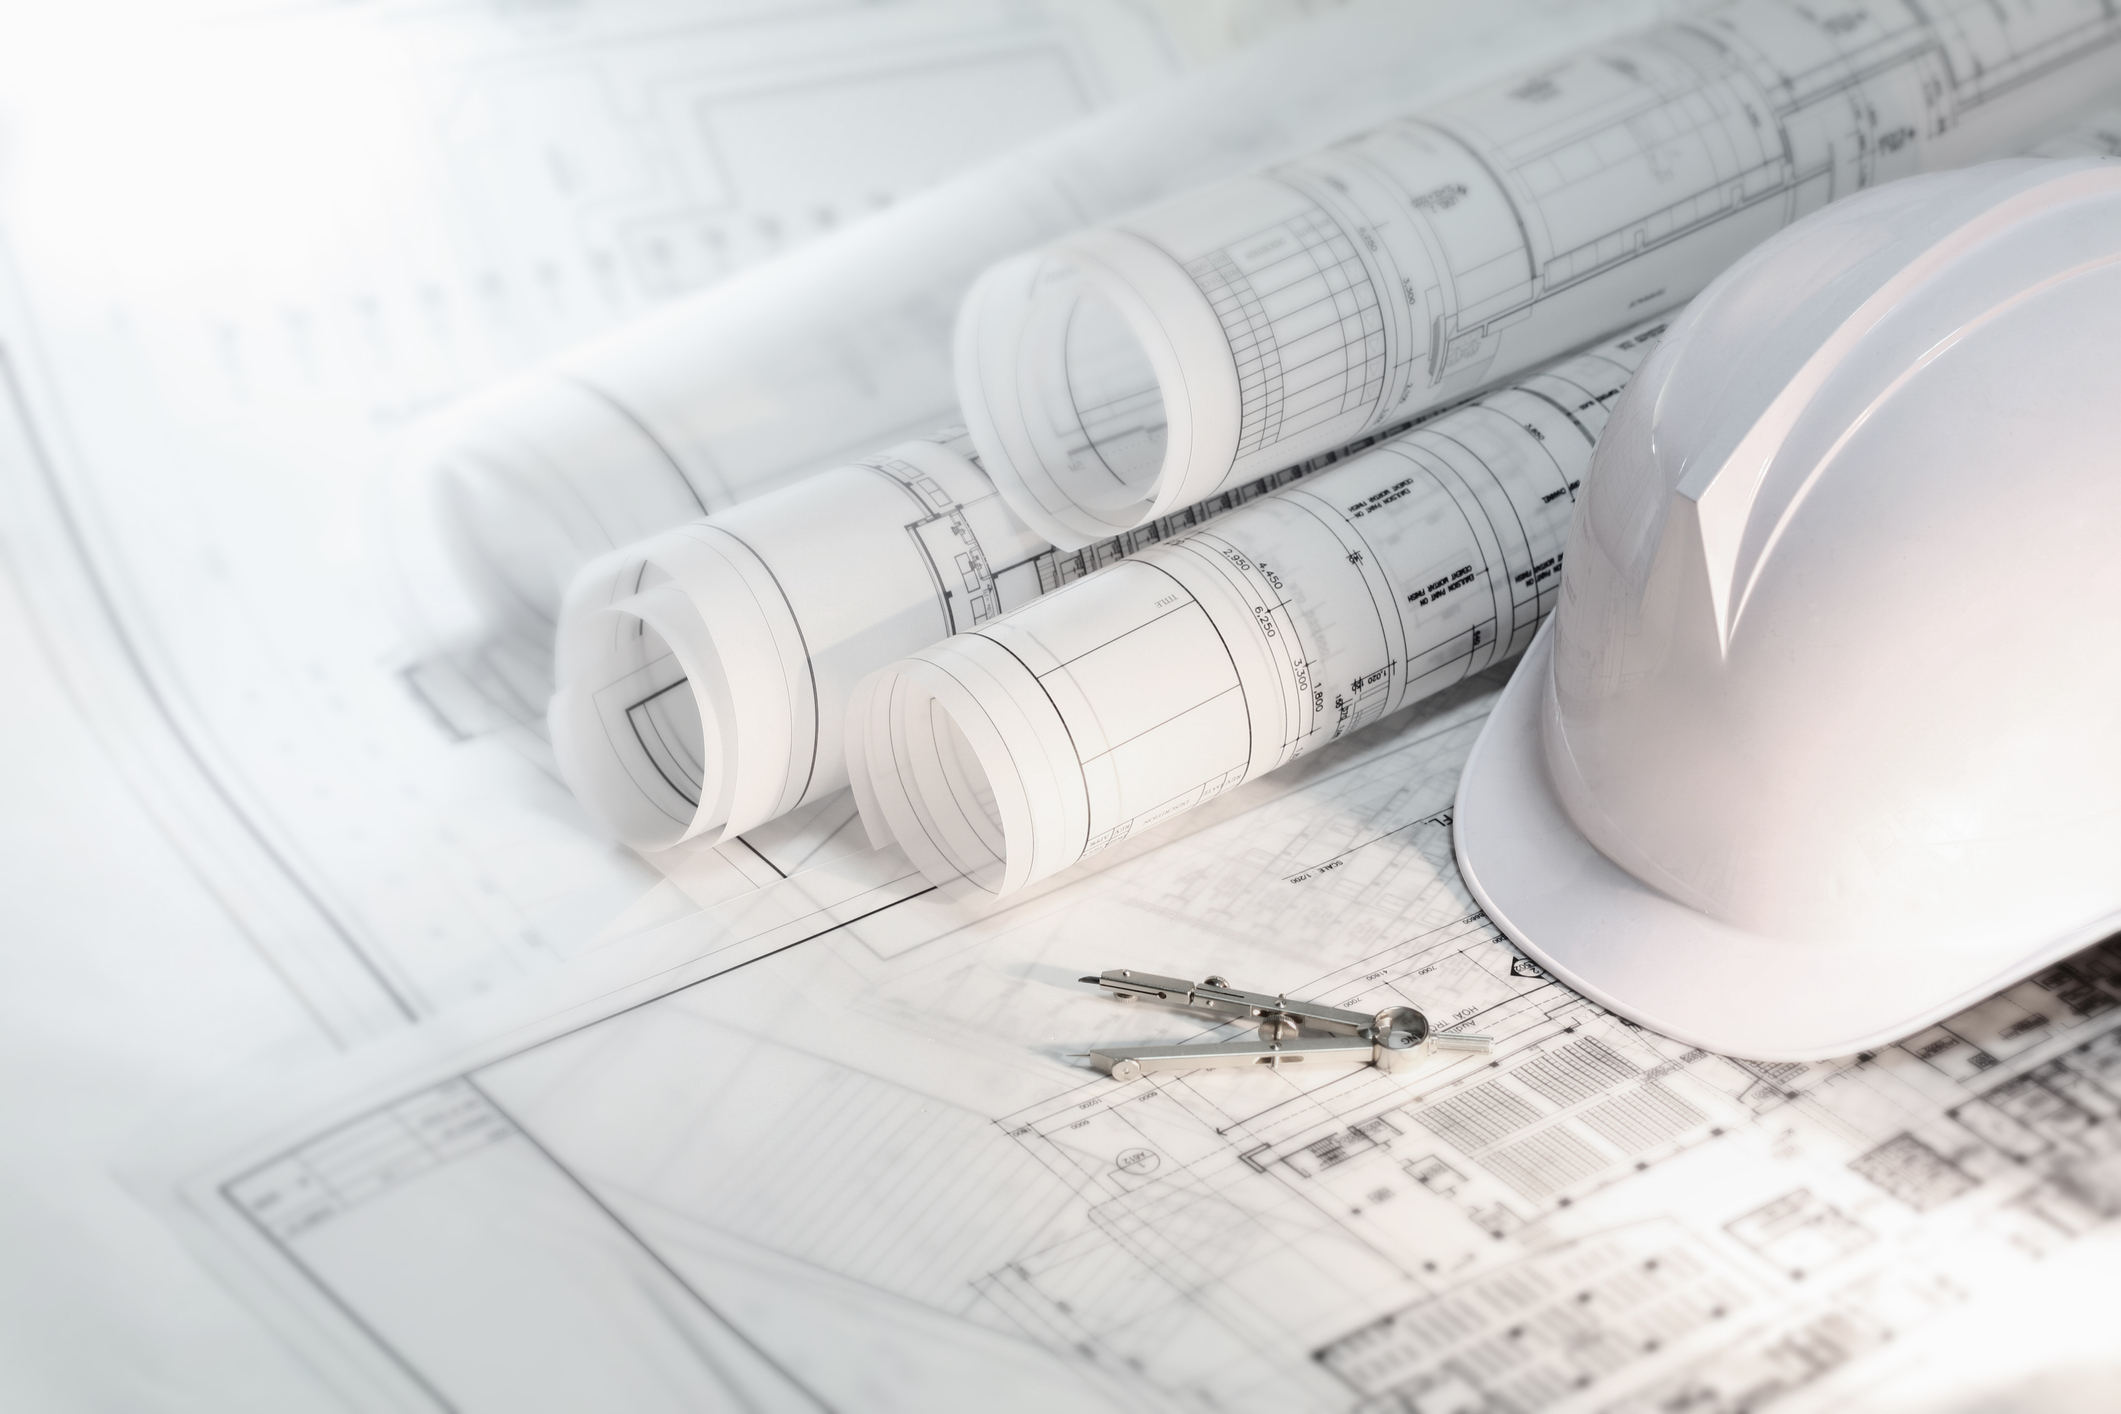 Stock image of blueprints and a hard hat